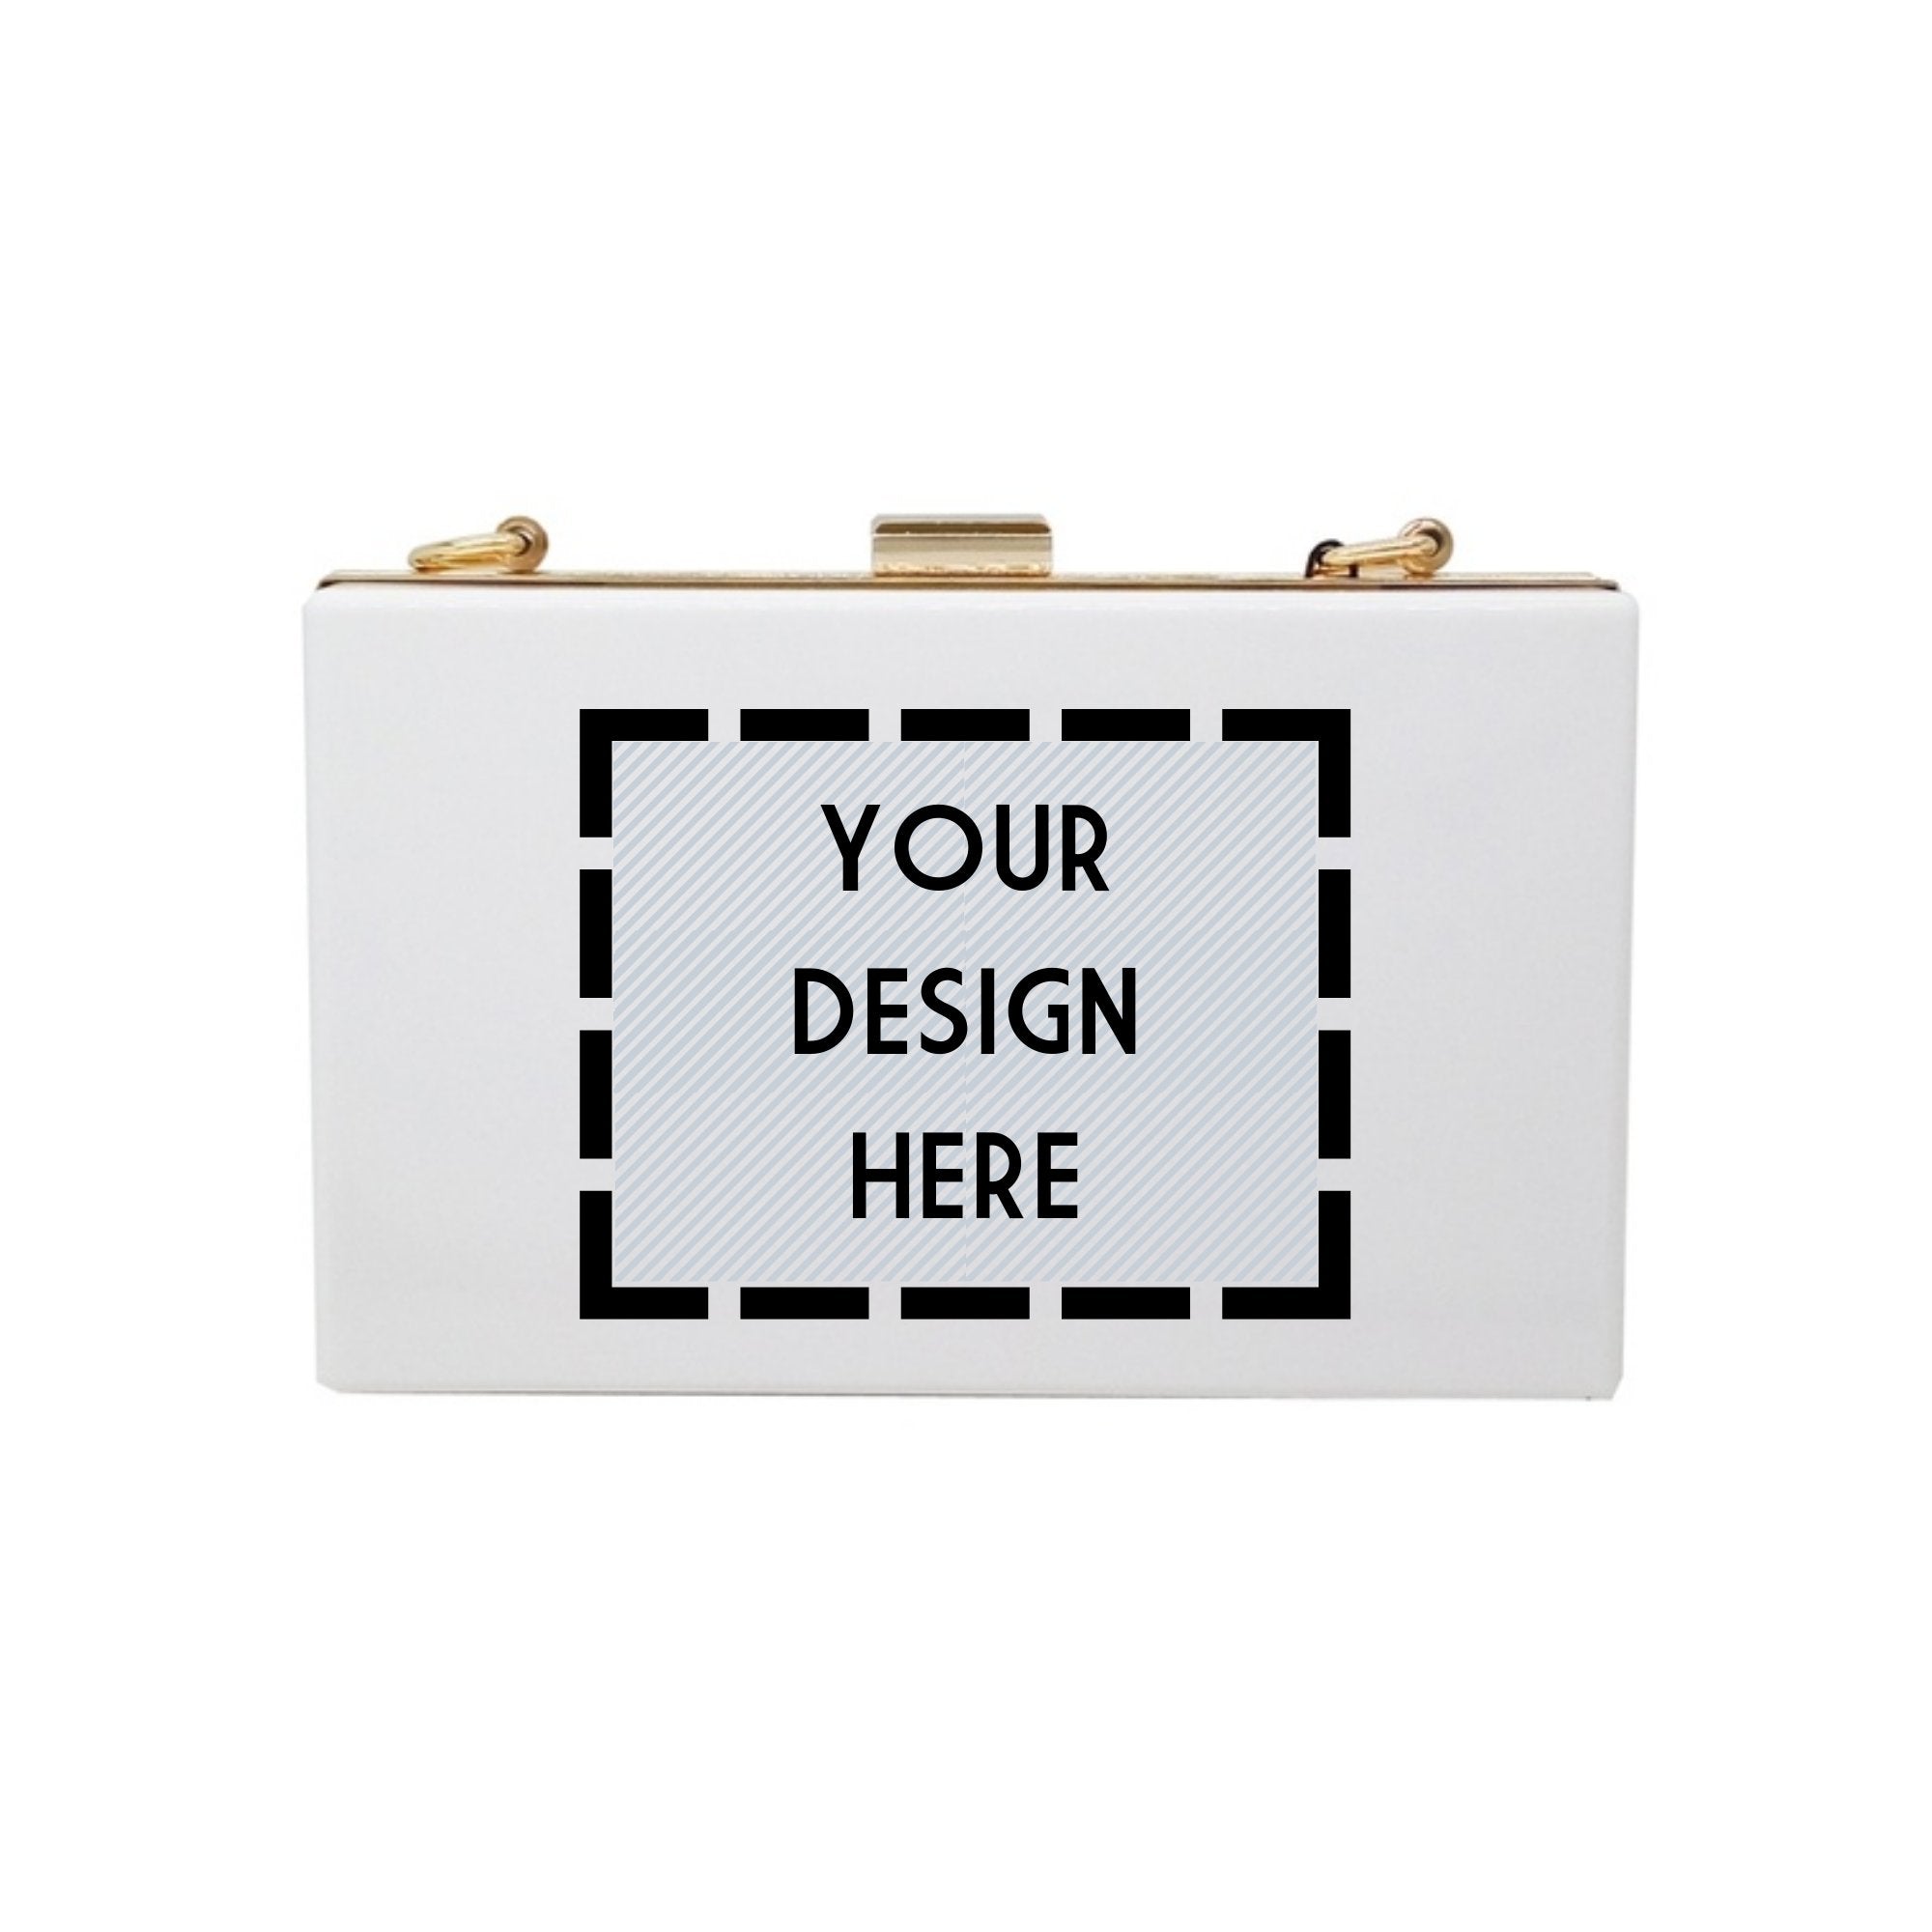 A white acrylic clutch with a customizable area on the front